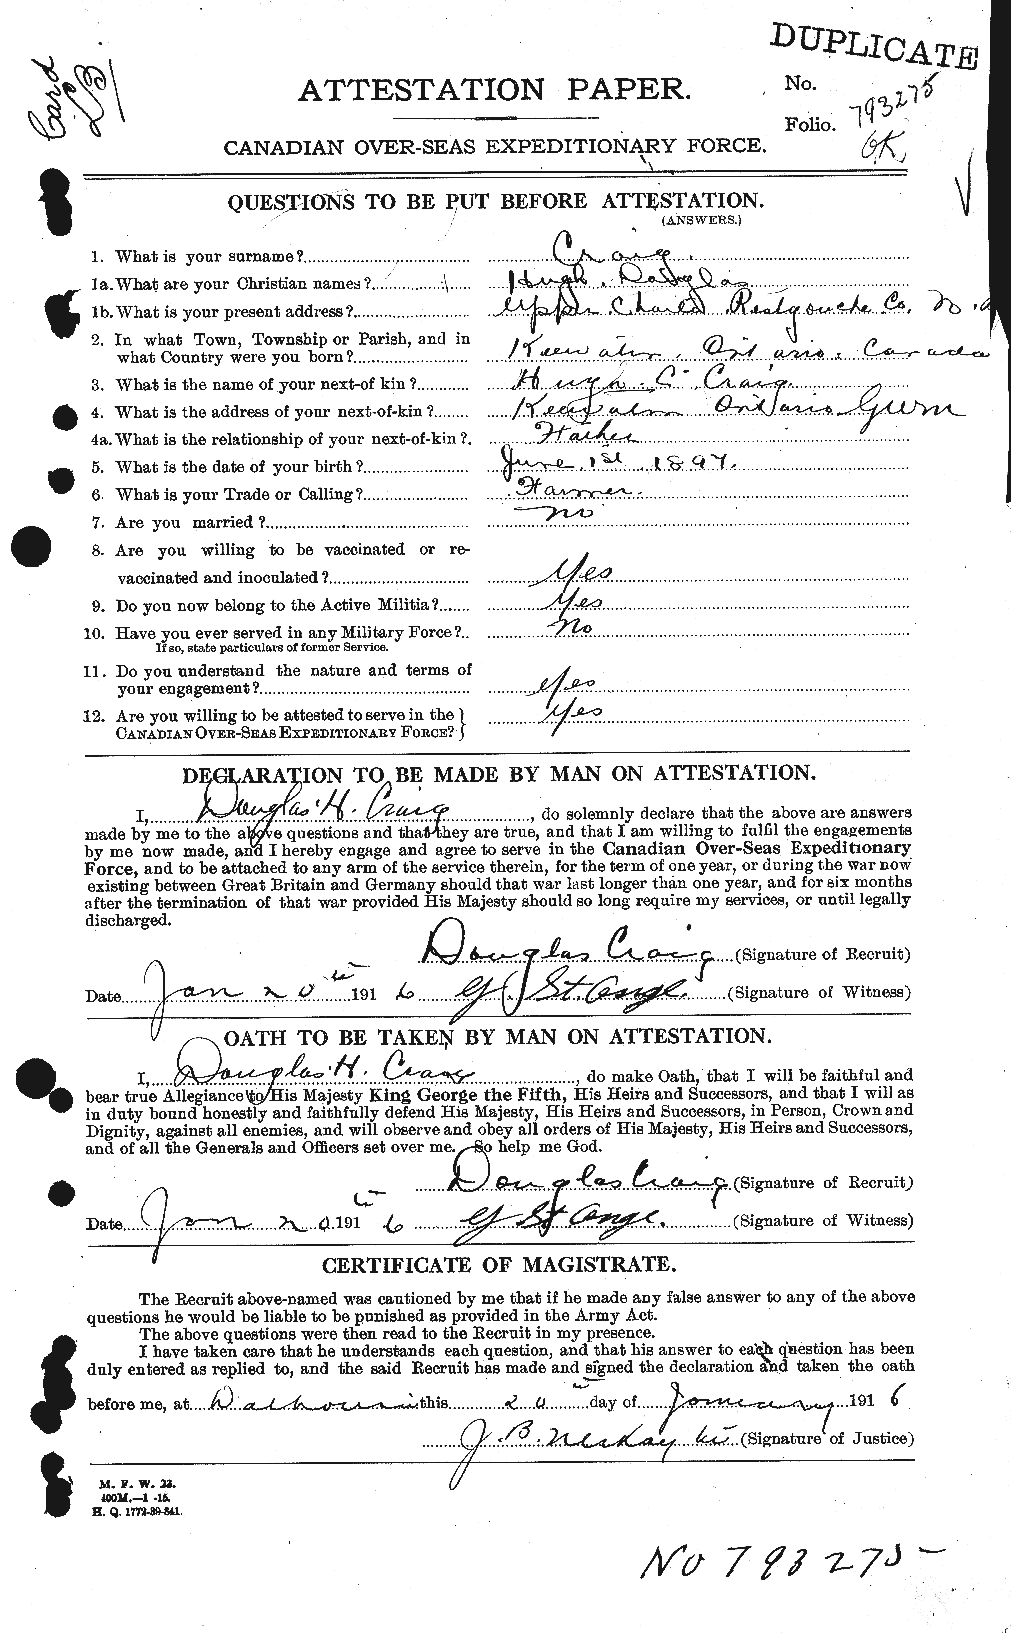 Personnel Records of the First World War - CEF 061674a